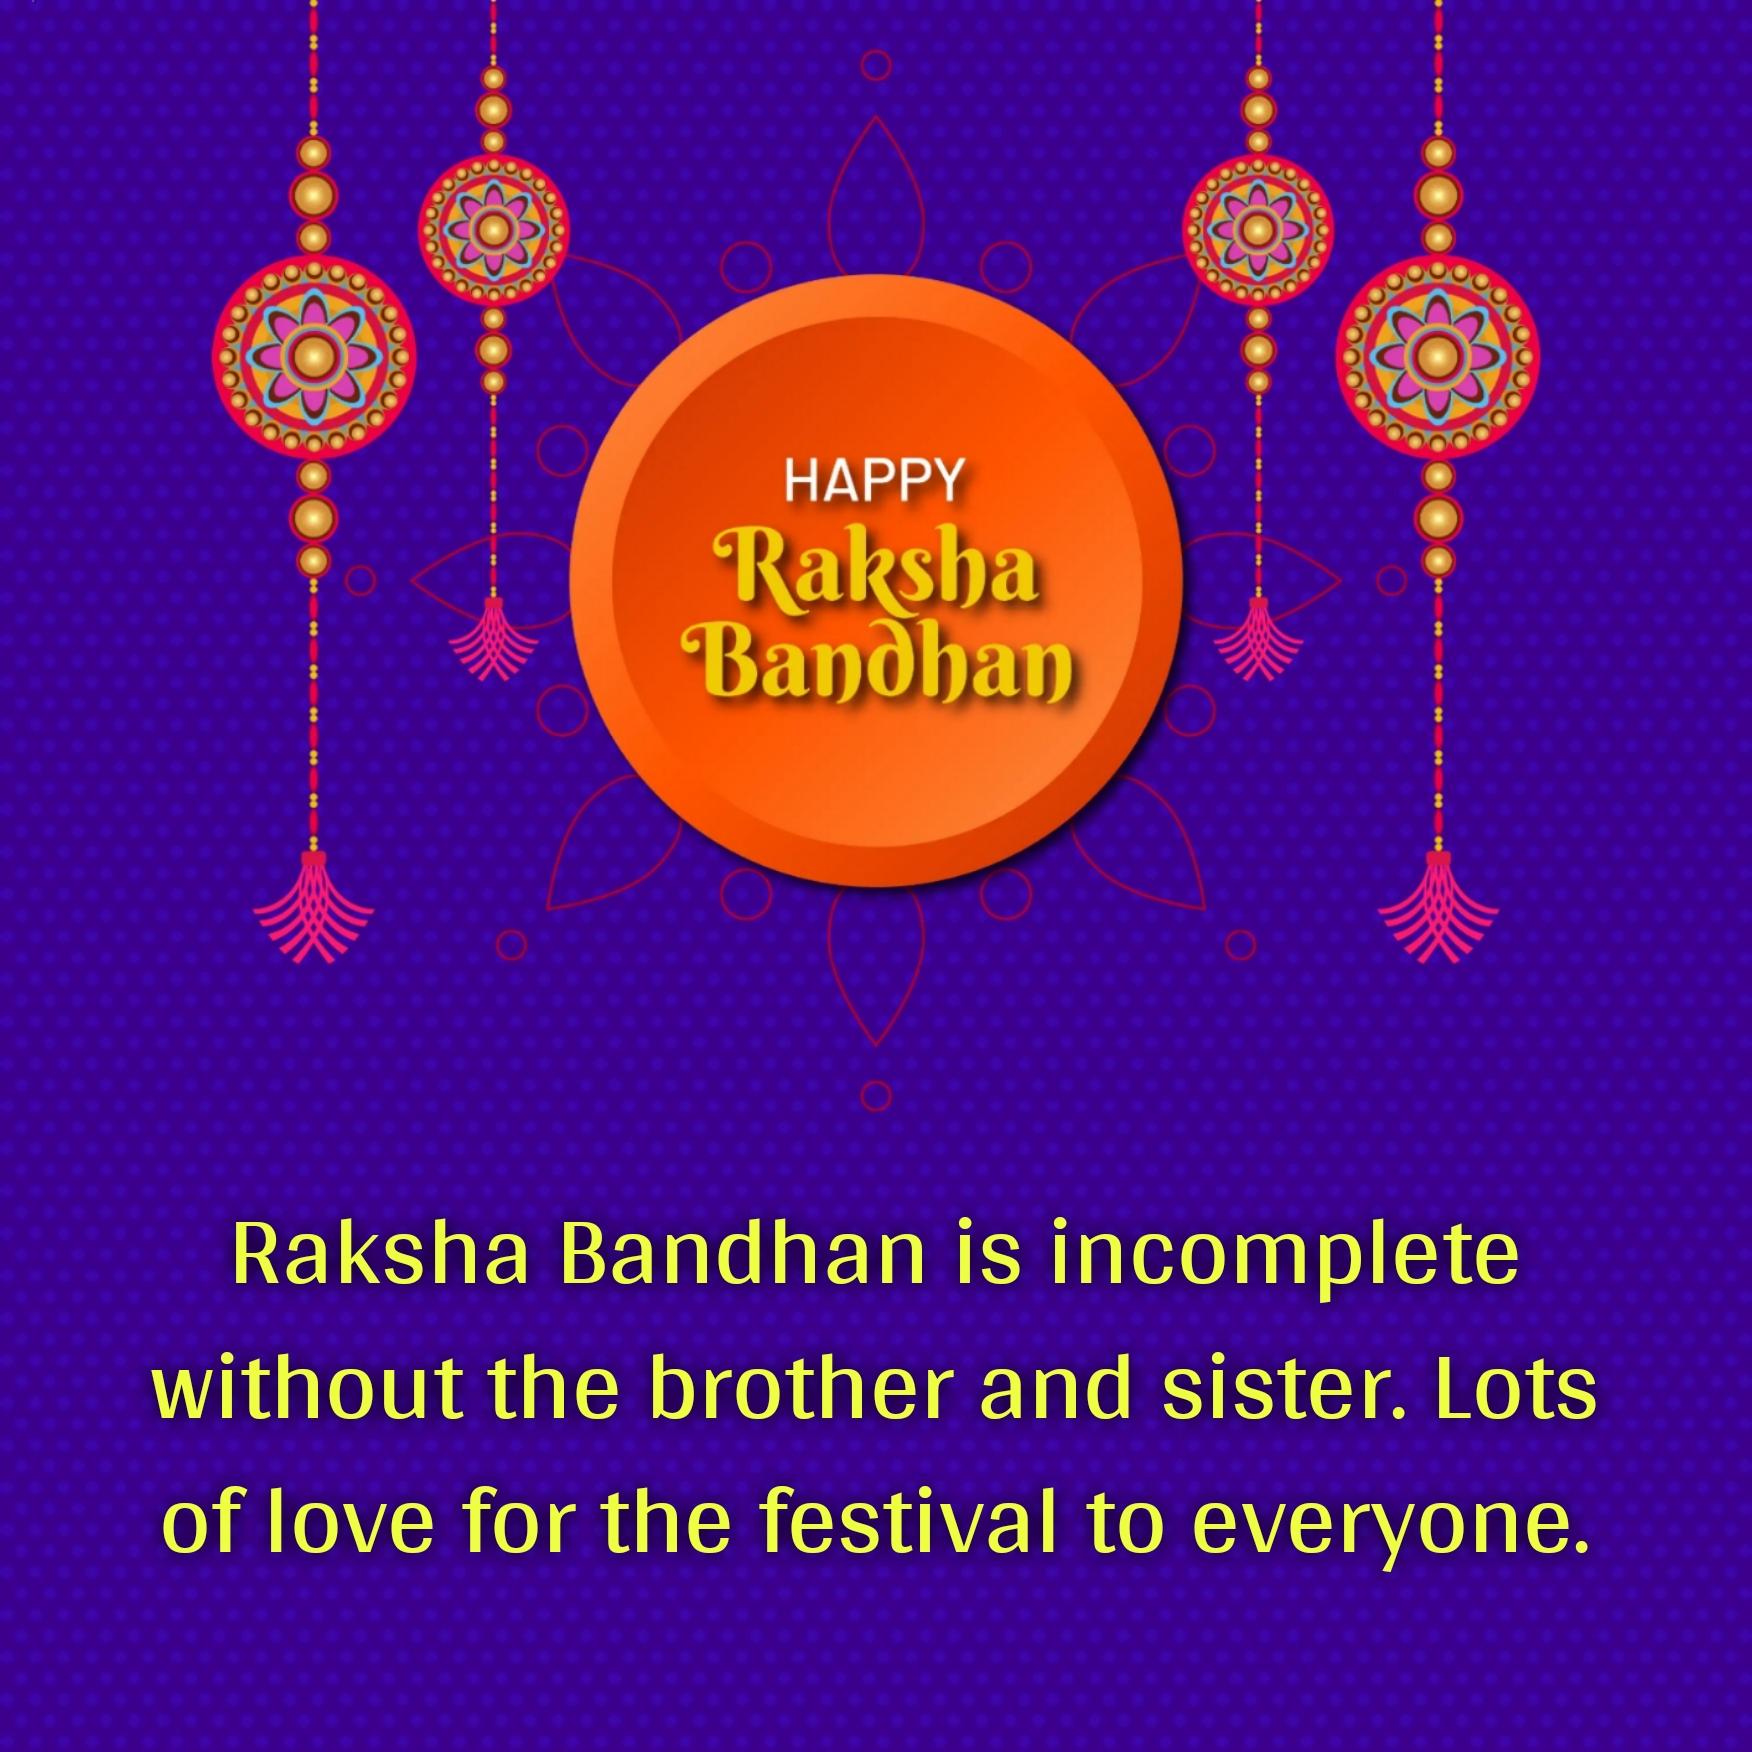 Raksha Bandhan is incomplete without the brother and sister